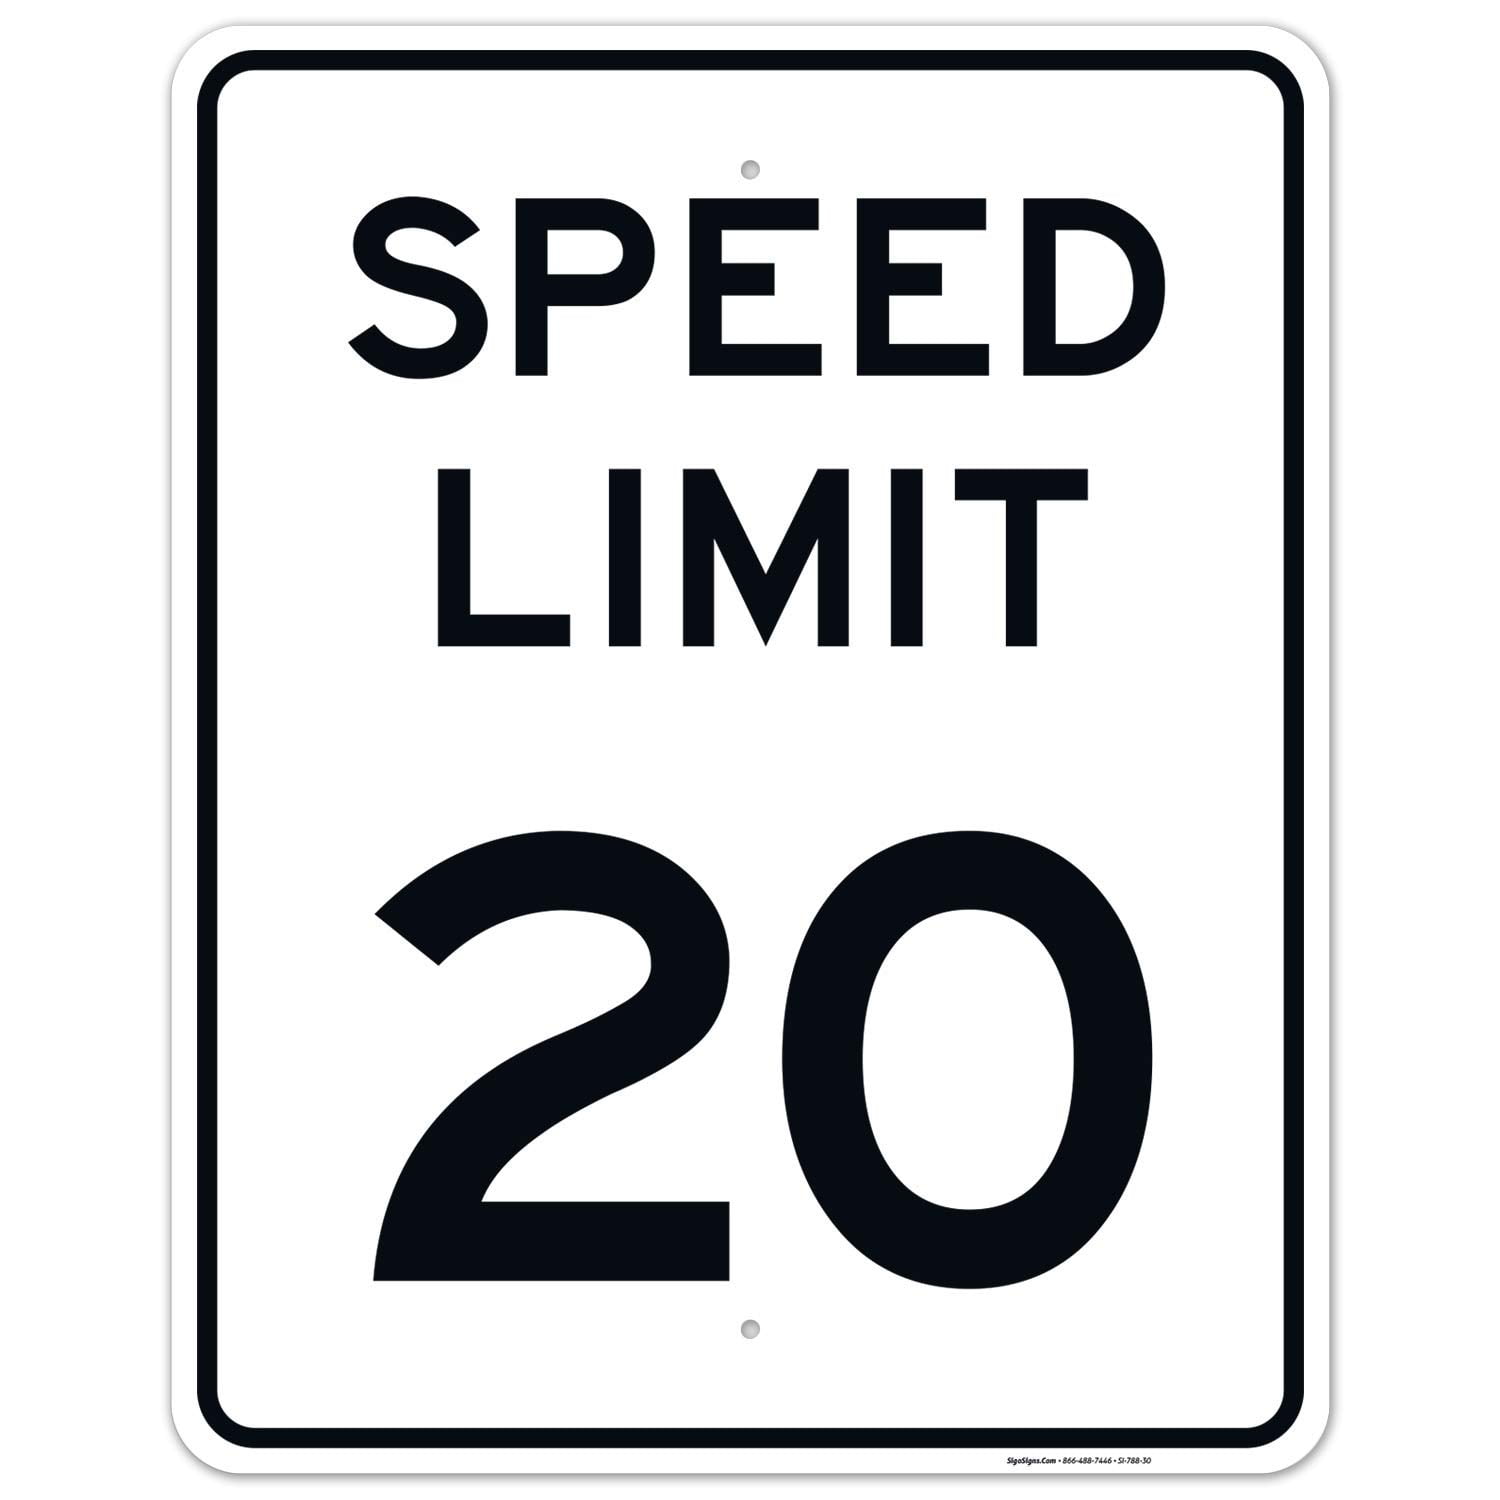 Speed Limit 20 MPH Sign, 12x16 Inches, 3M EGP Reflective .063 Aluminum ...